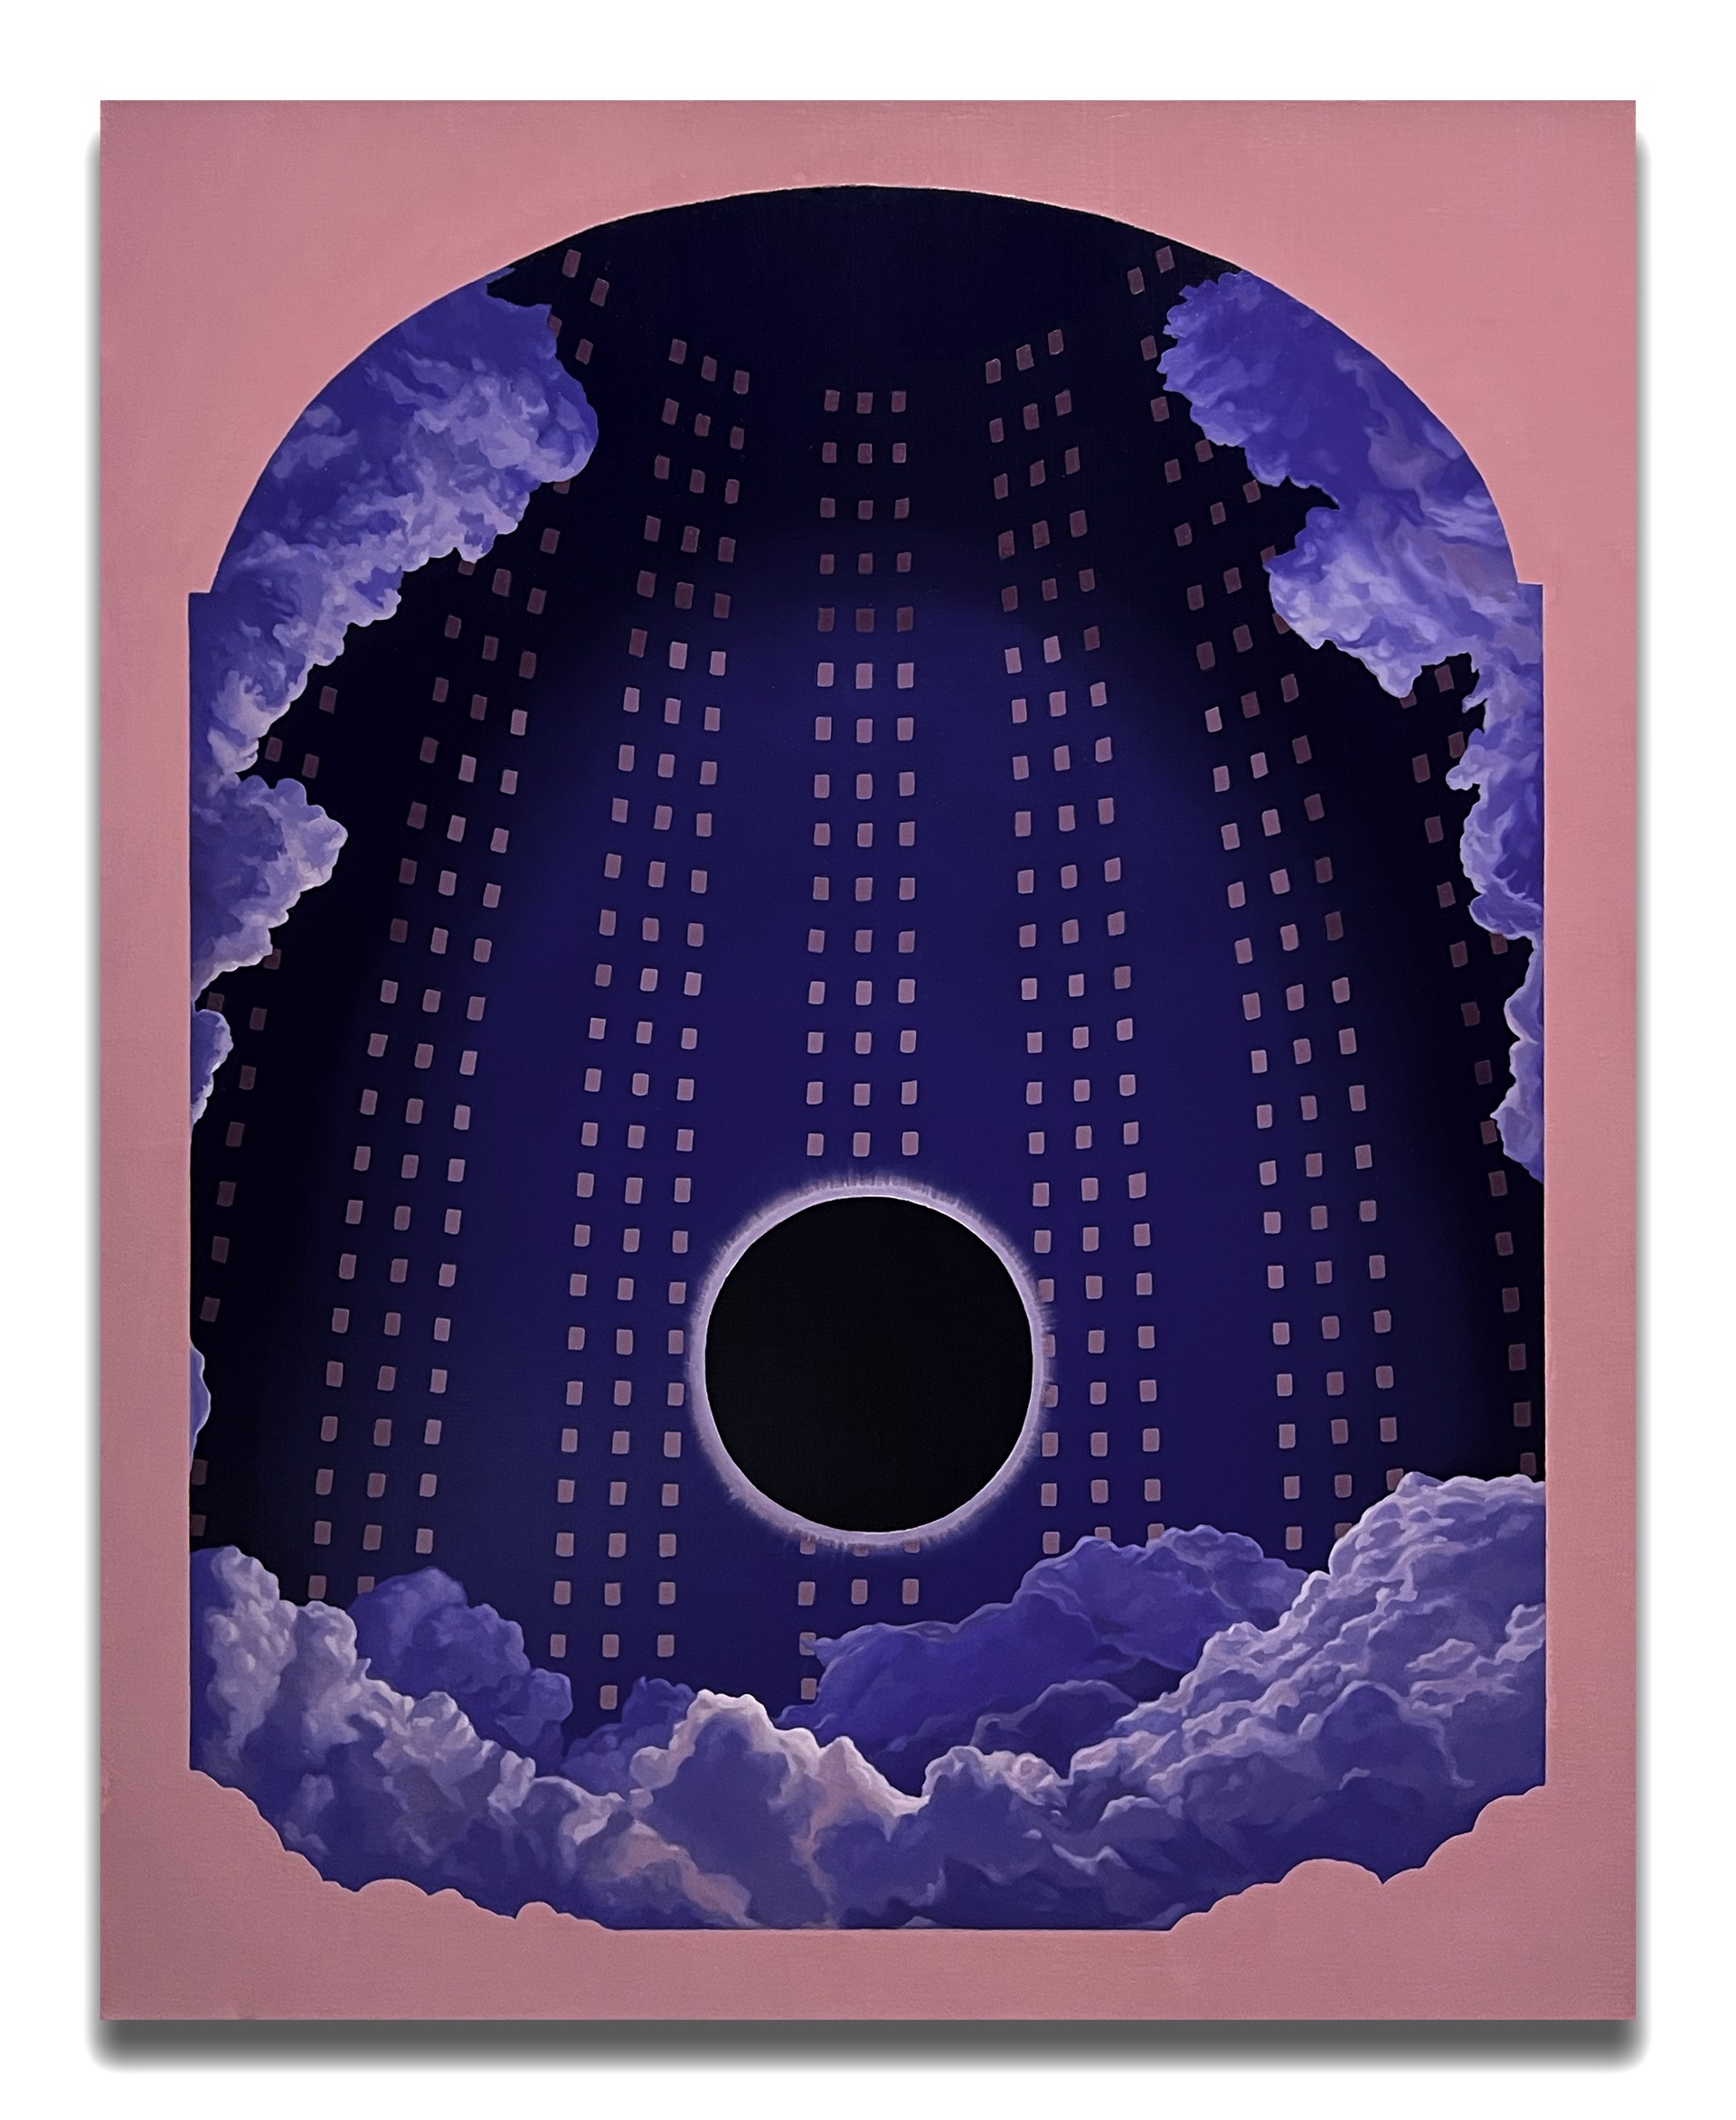 Chamber for Solar Eclipse by Shayne Murphy